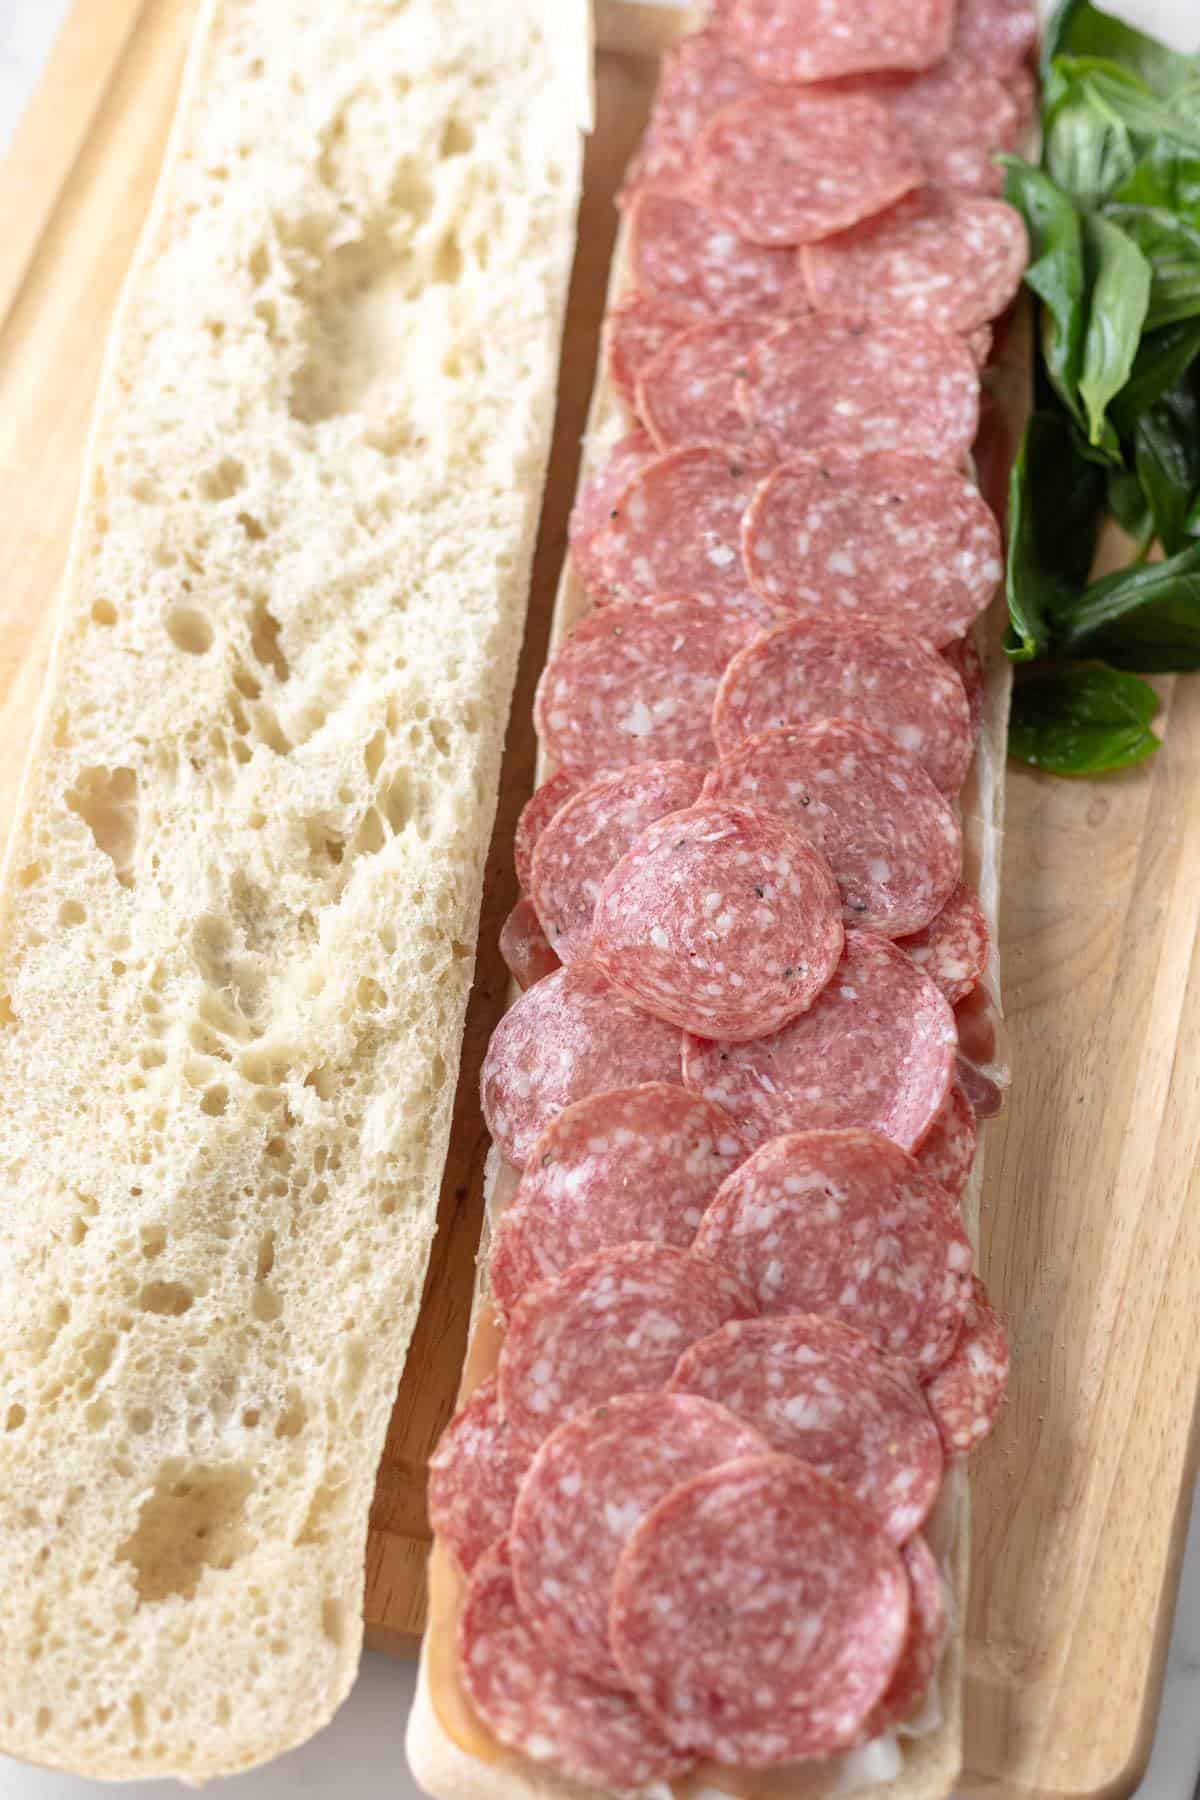 salami layered on a loaf of bread next to plain bread and basil leaves